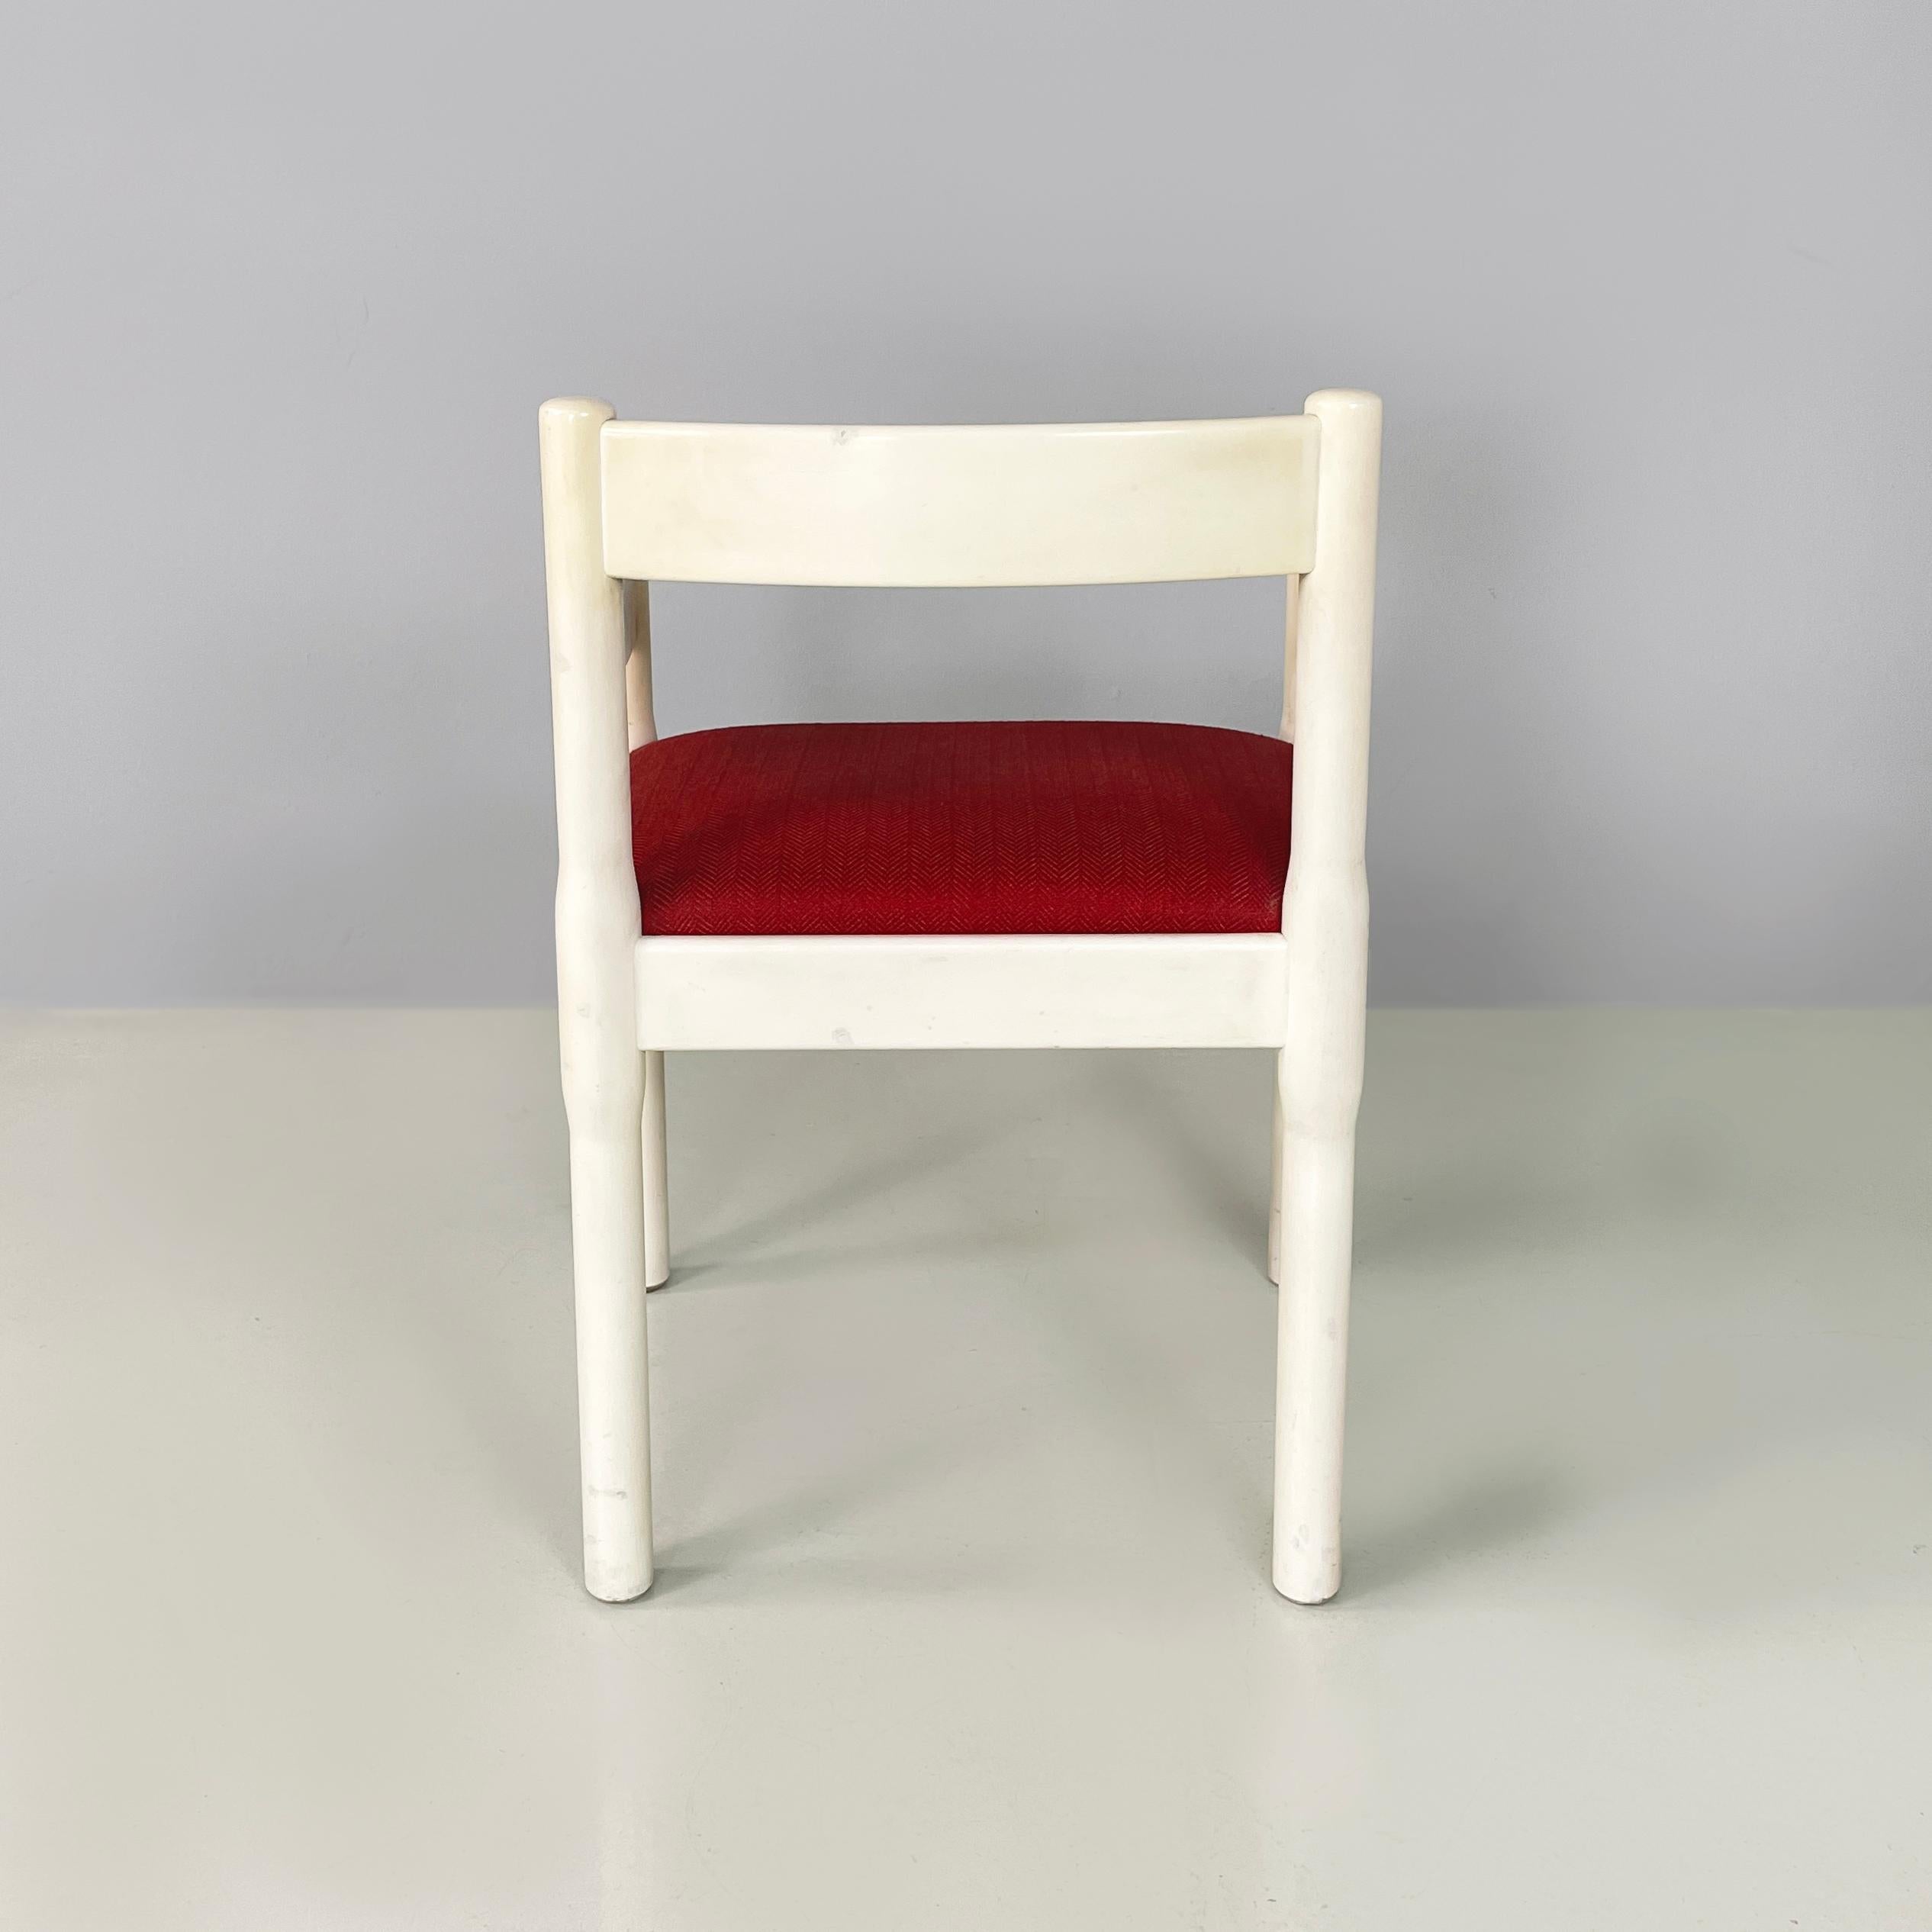 Late 20th Century Italian mid-century modern Chair Carimate by Vico Magistretti for Cassina, 1970s For Sale